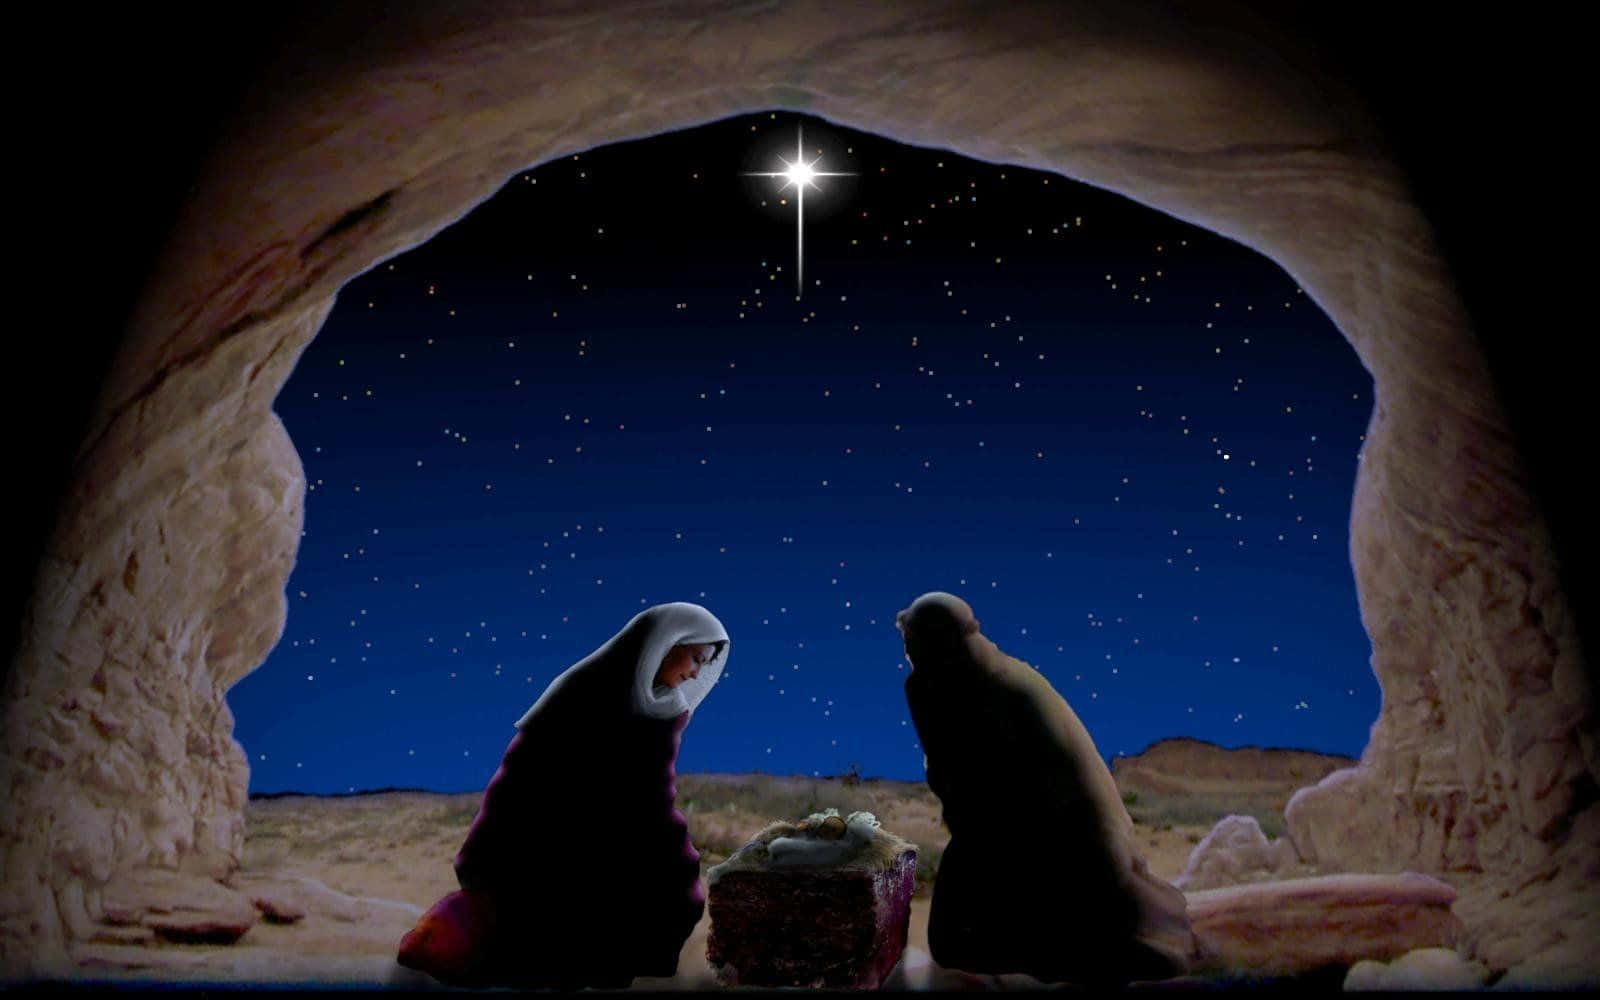 "Let us celebrate the birth of Jesus and the gift of the holy."